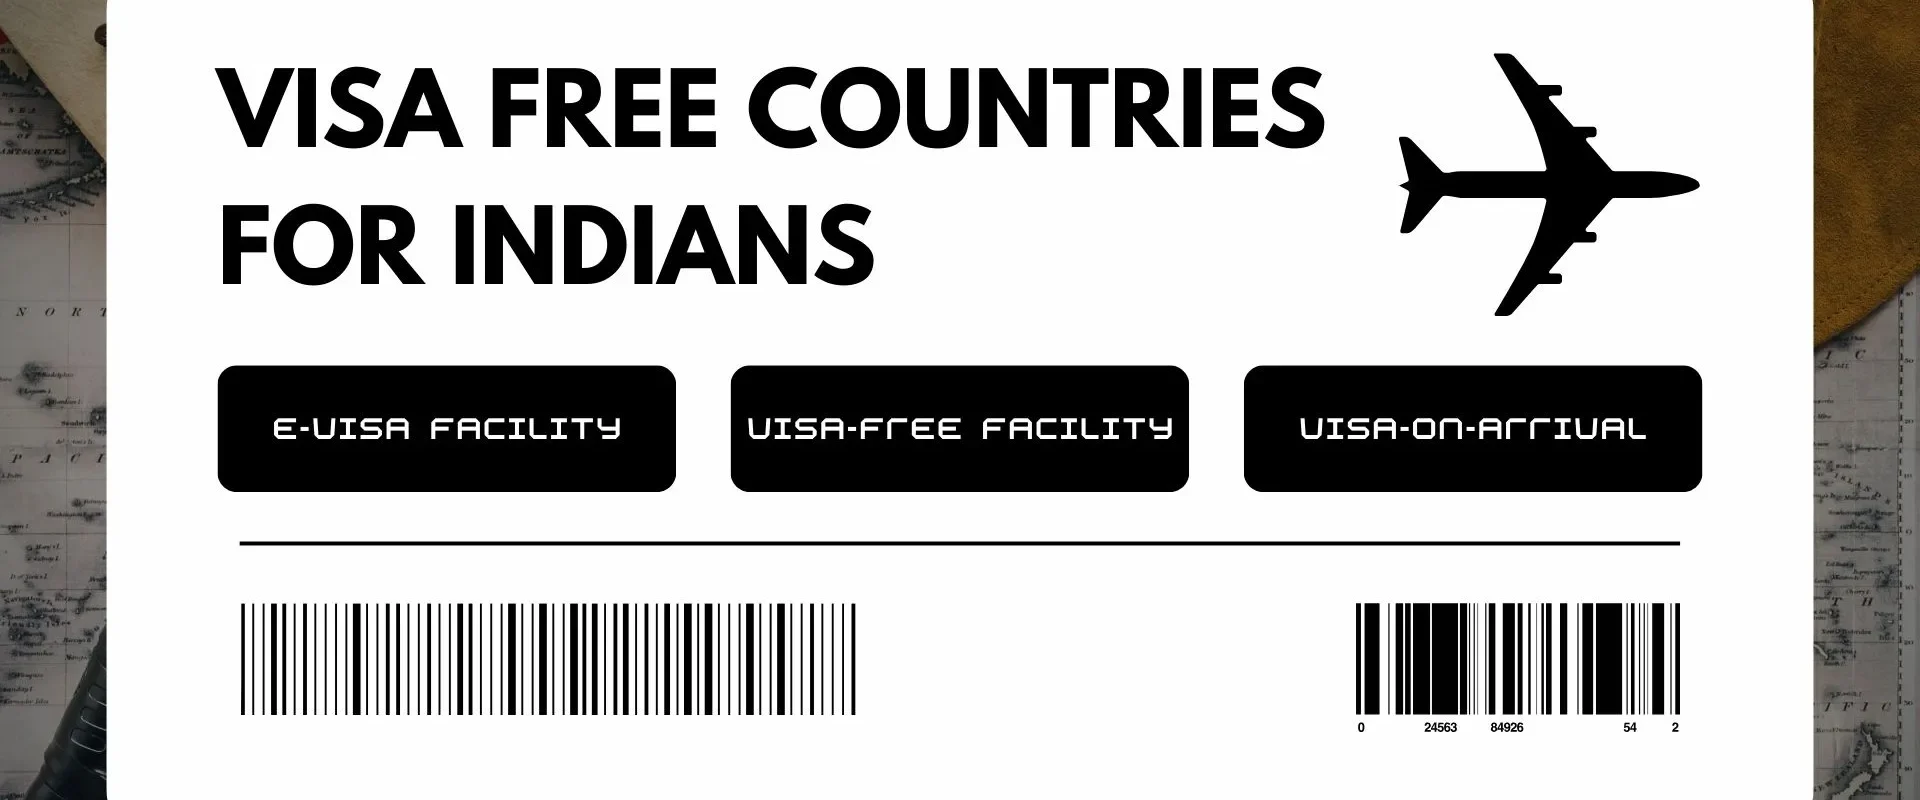 Visa free countries for Indians